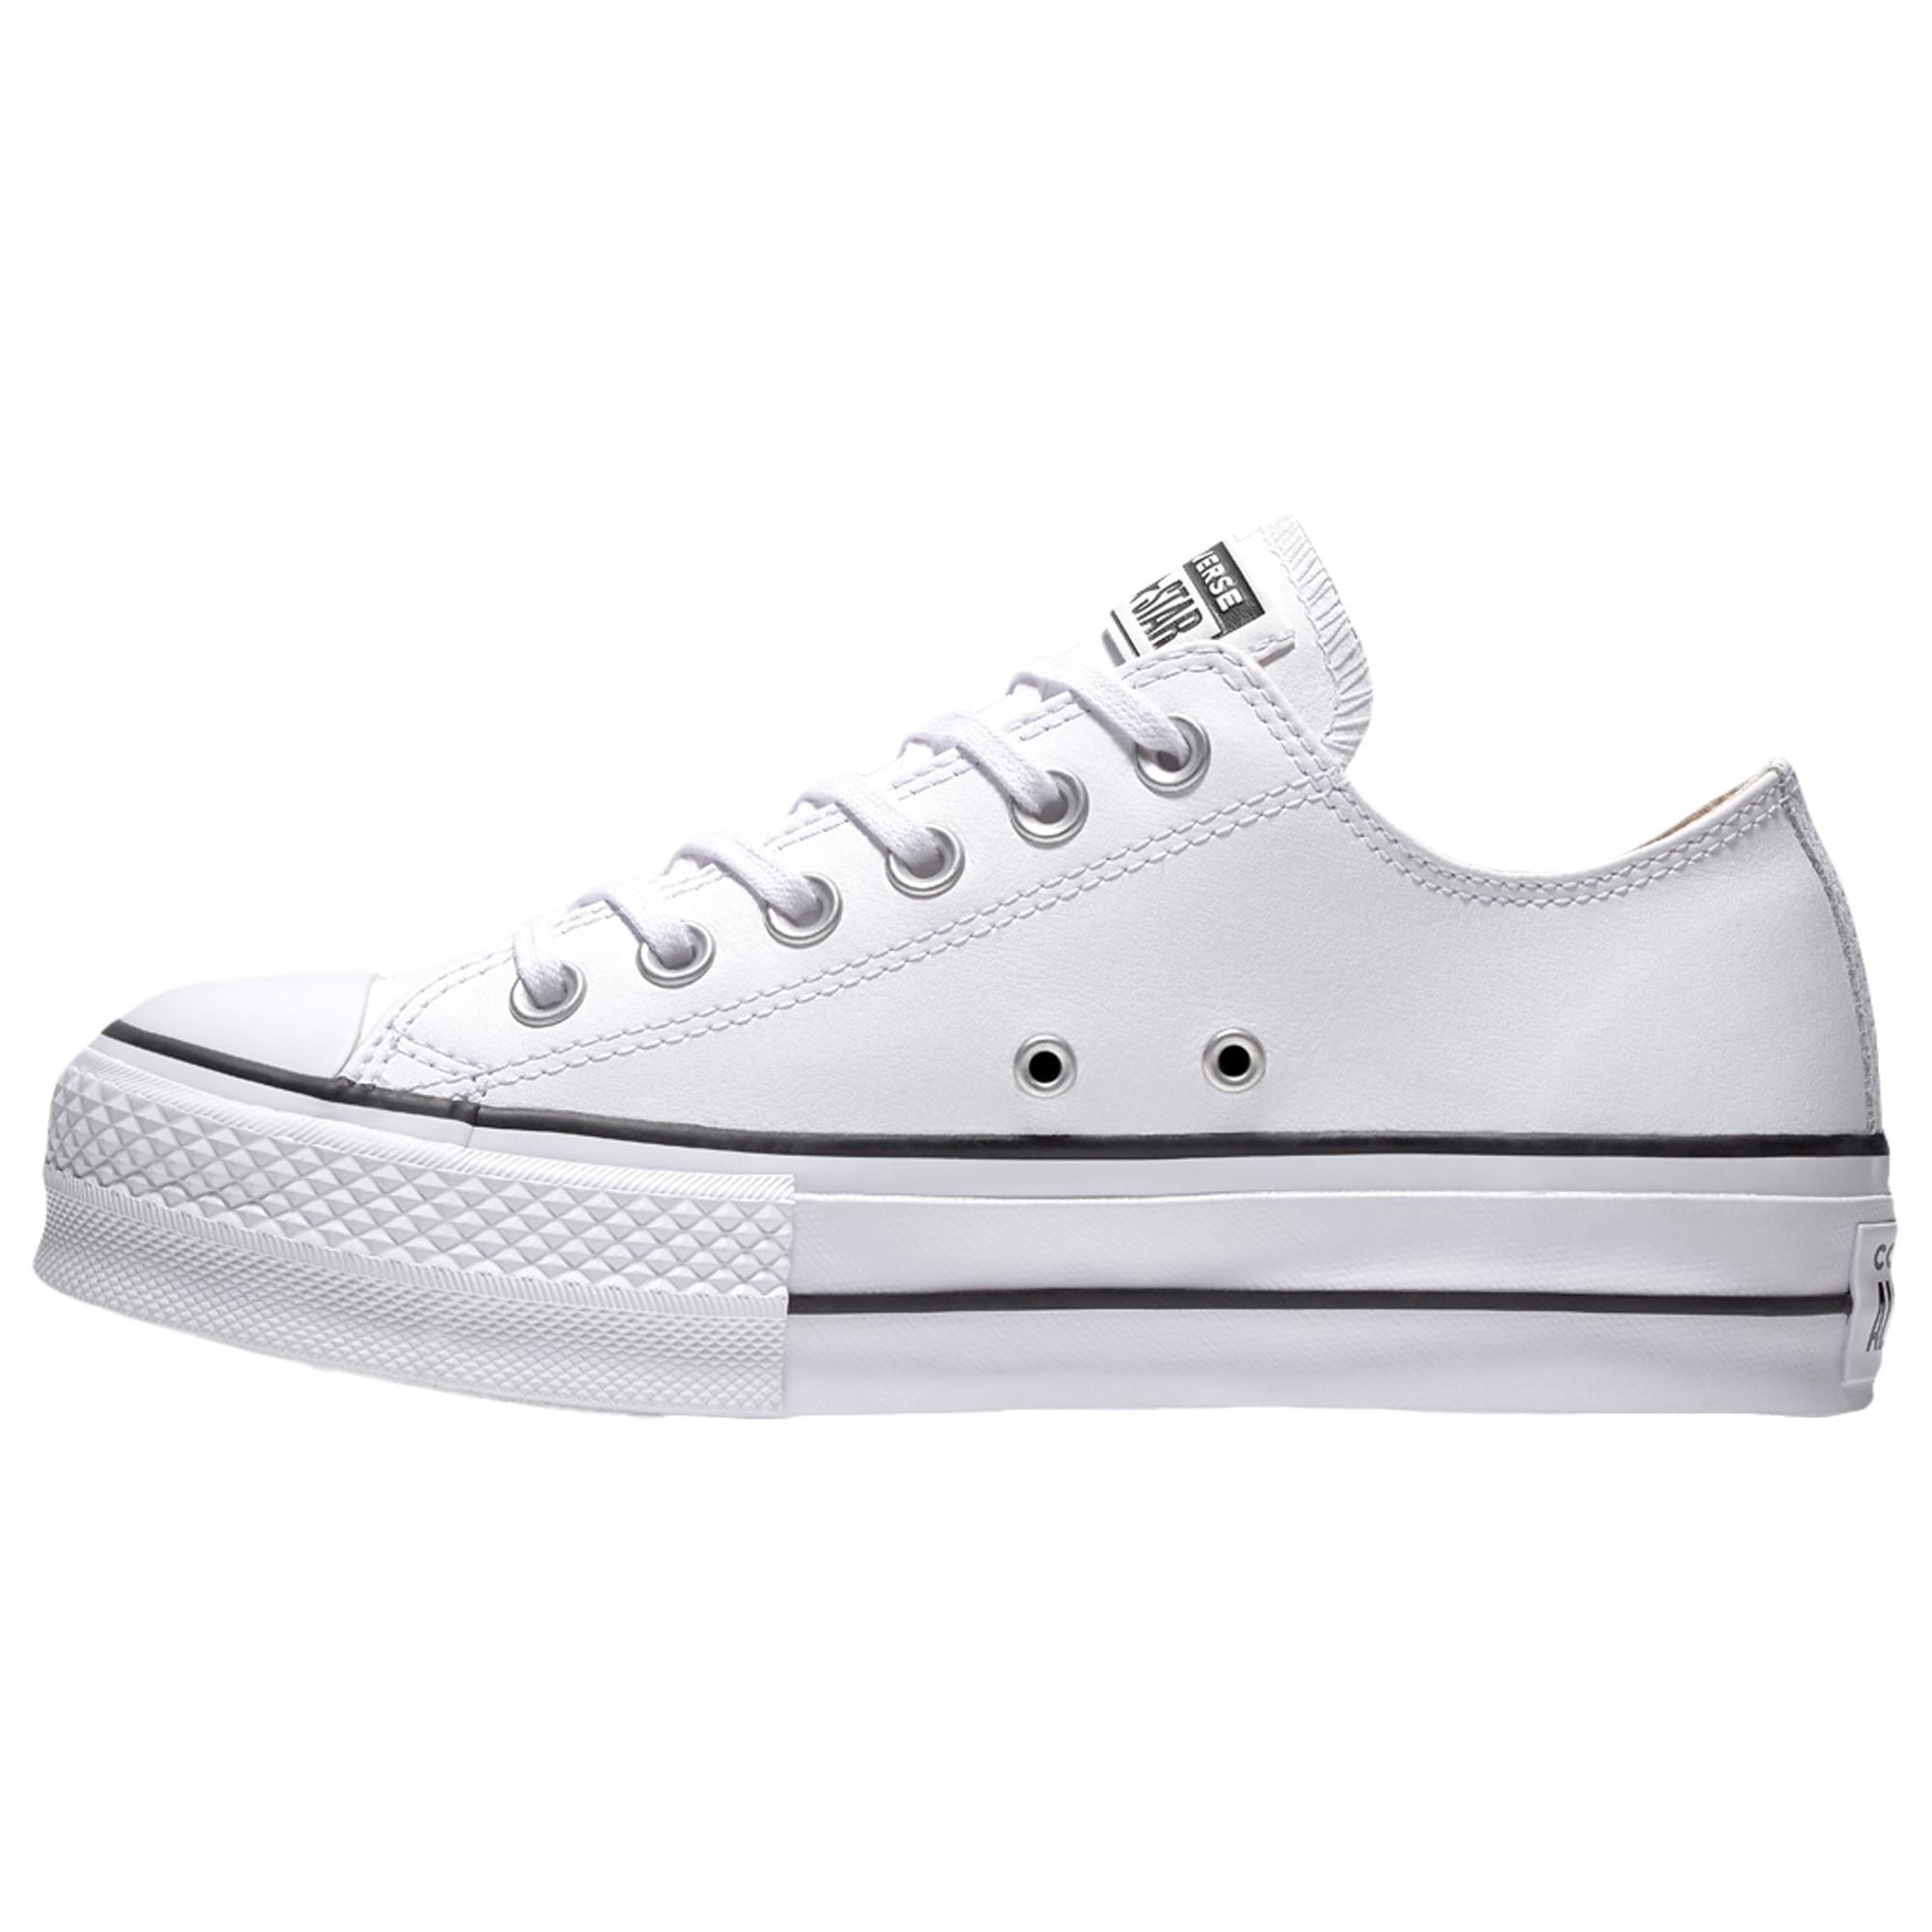 Converse All Star Lift Ox Leather Low - Shoes in White/Black (White) - Lyst